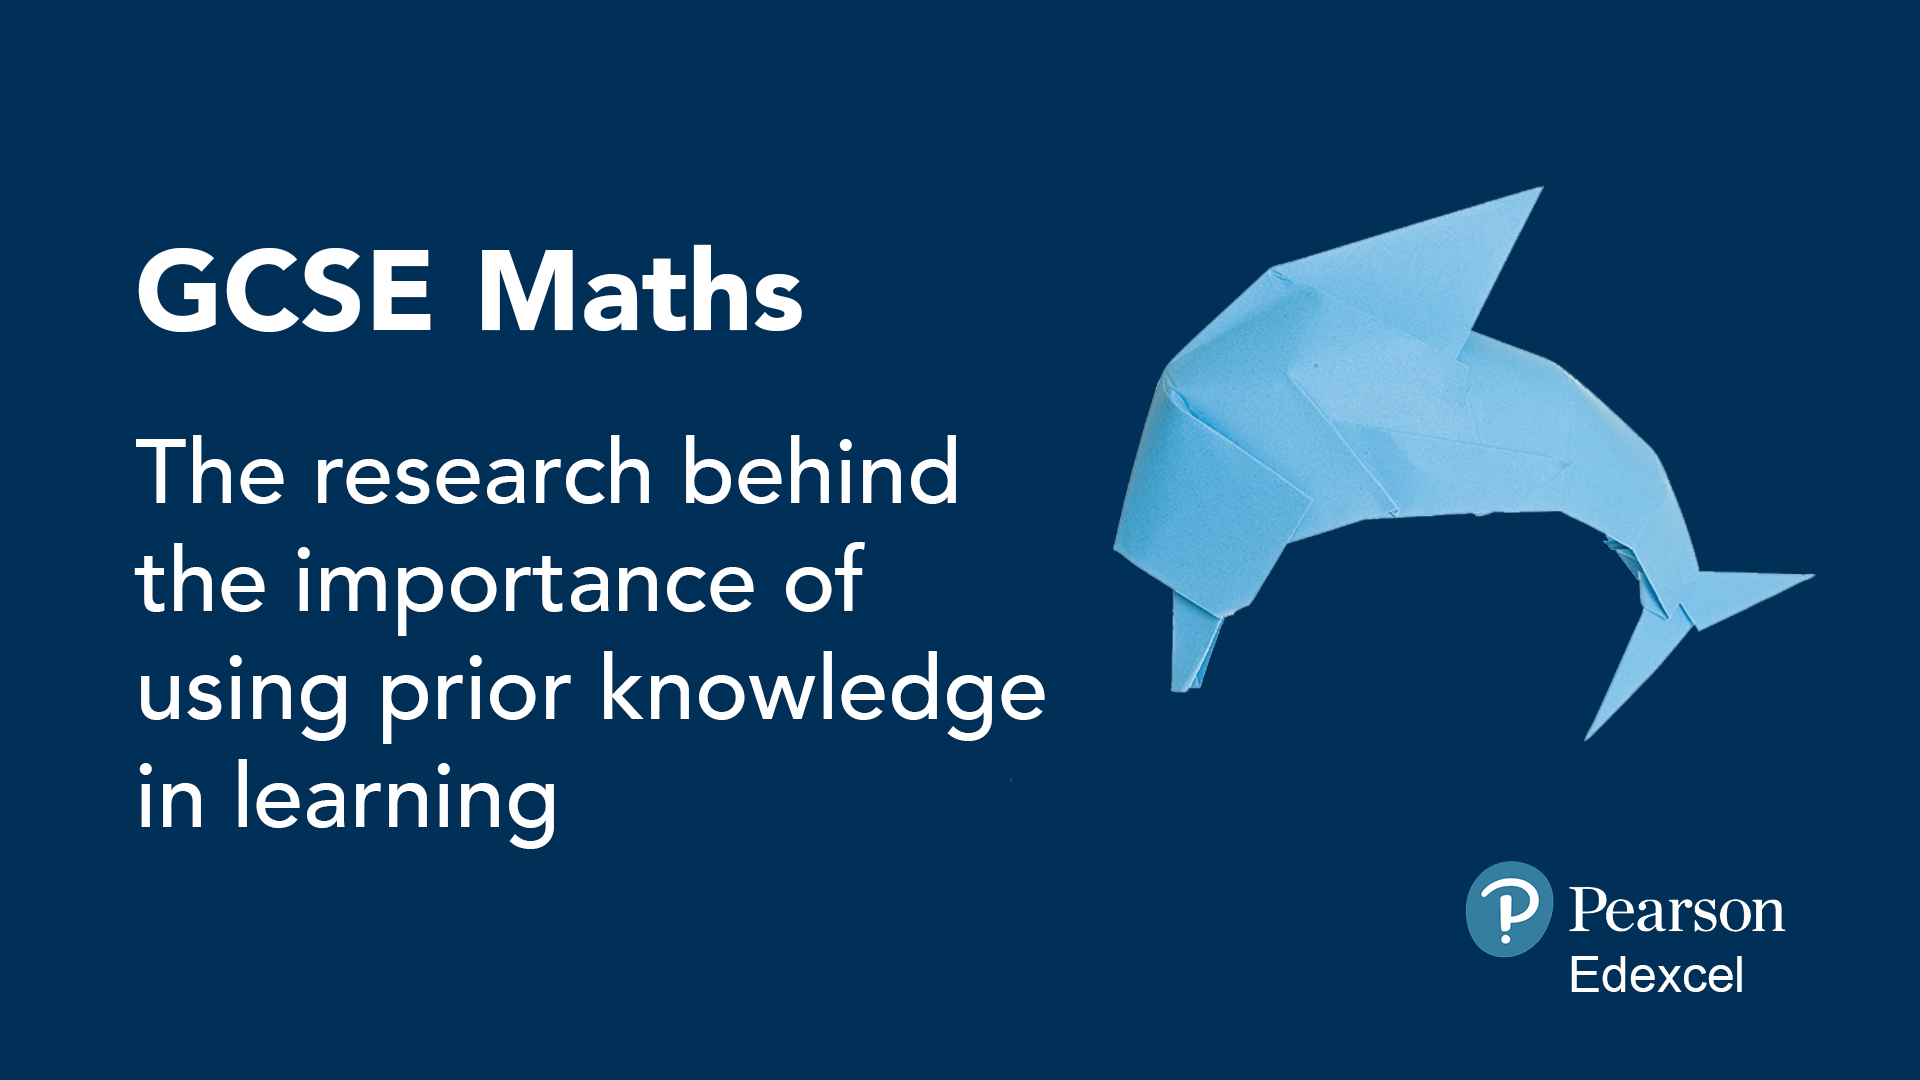 GCSE Maths: The research behind the importance of using prior knowledge in learning